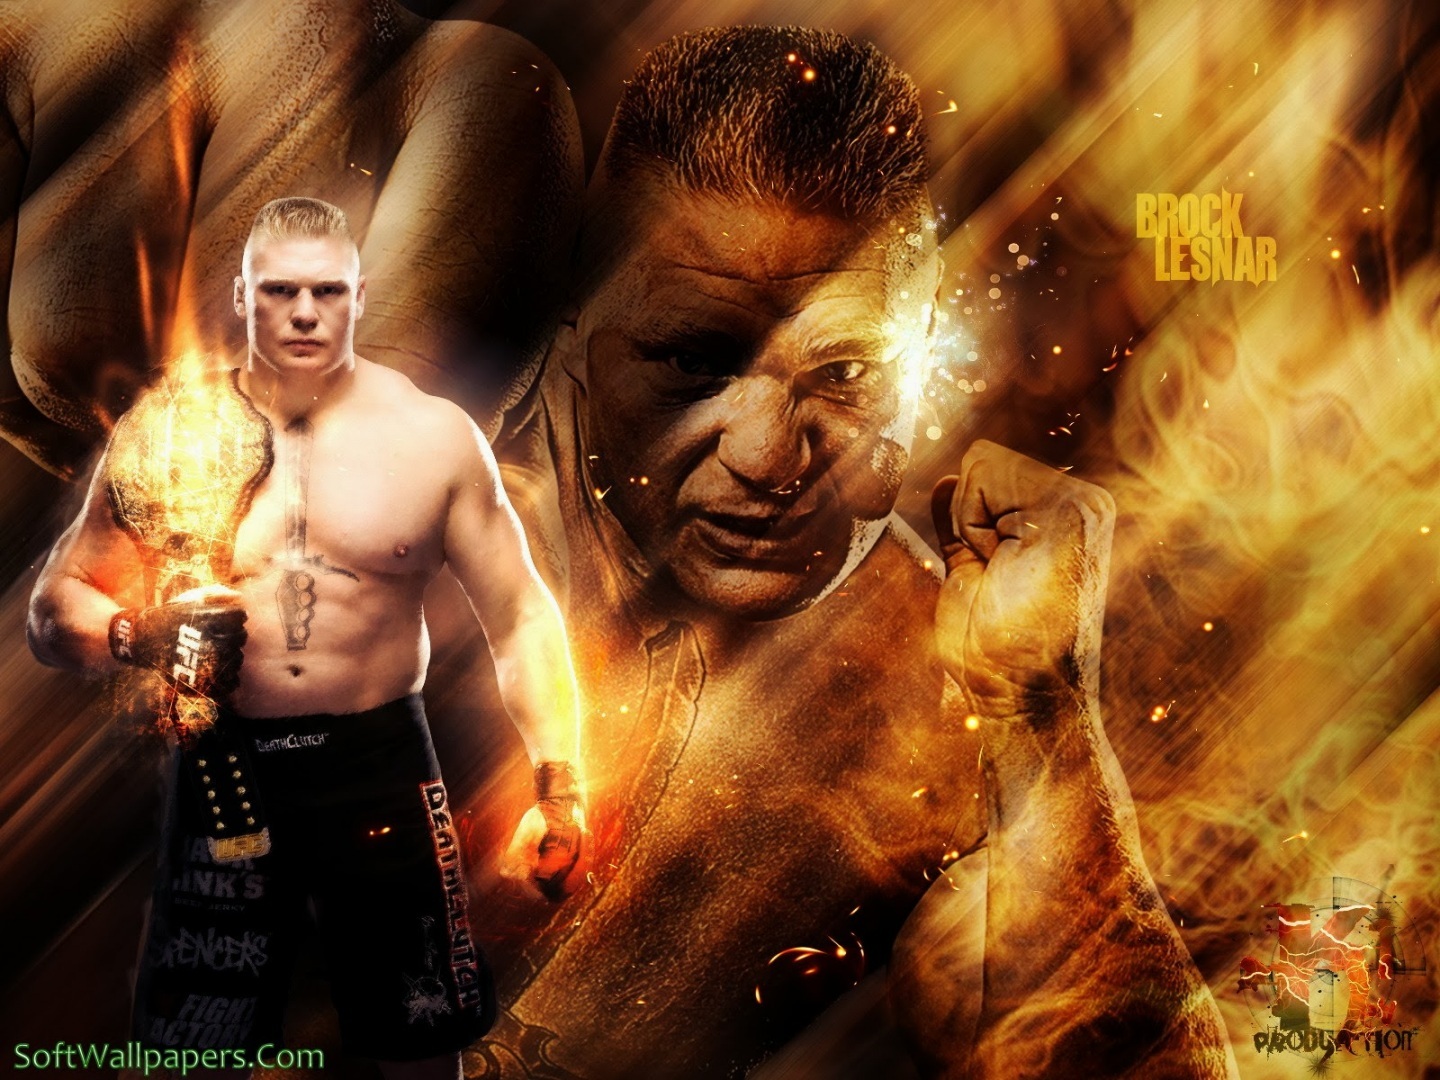 Brock Lesnar Wwe Hd Wallpapers Soft Wallpapers Sport Images Wwe Hd ...